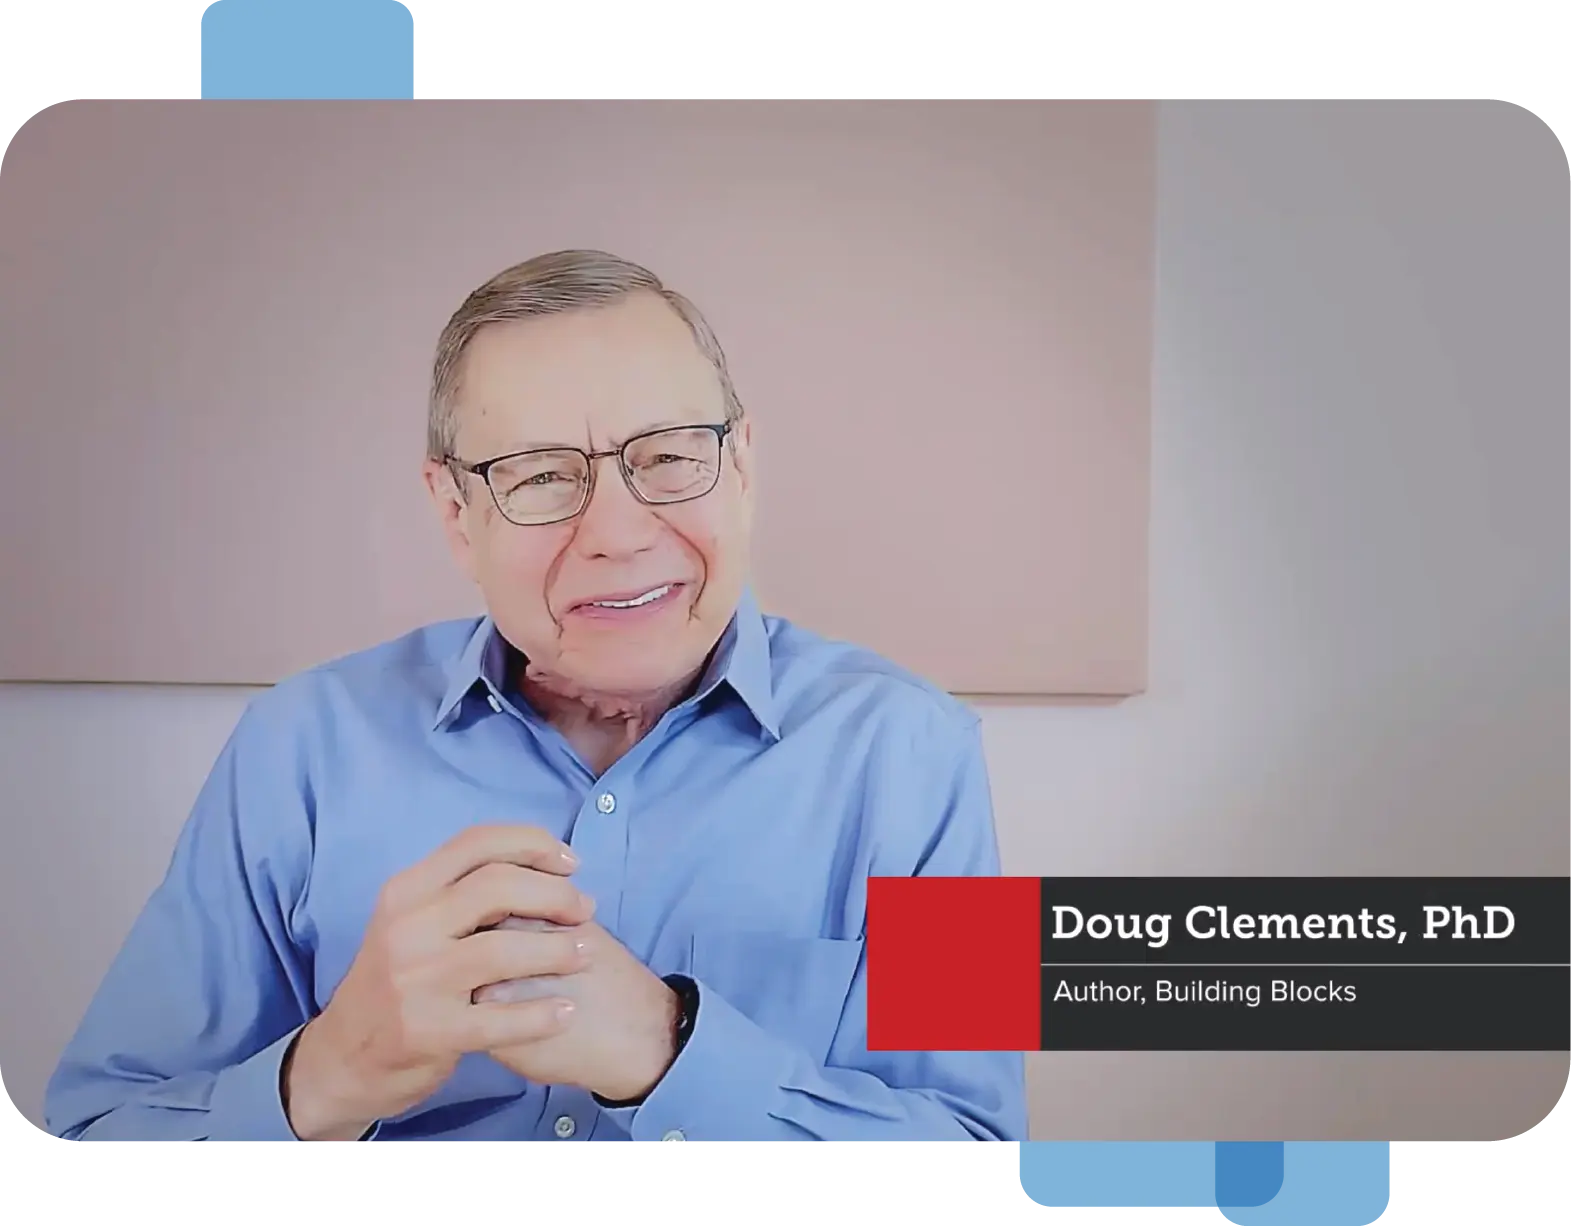 A sample video from the Author Video Series featuring Dr. Doug Clements.